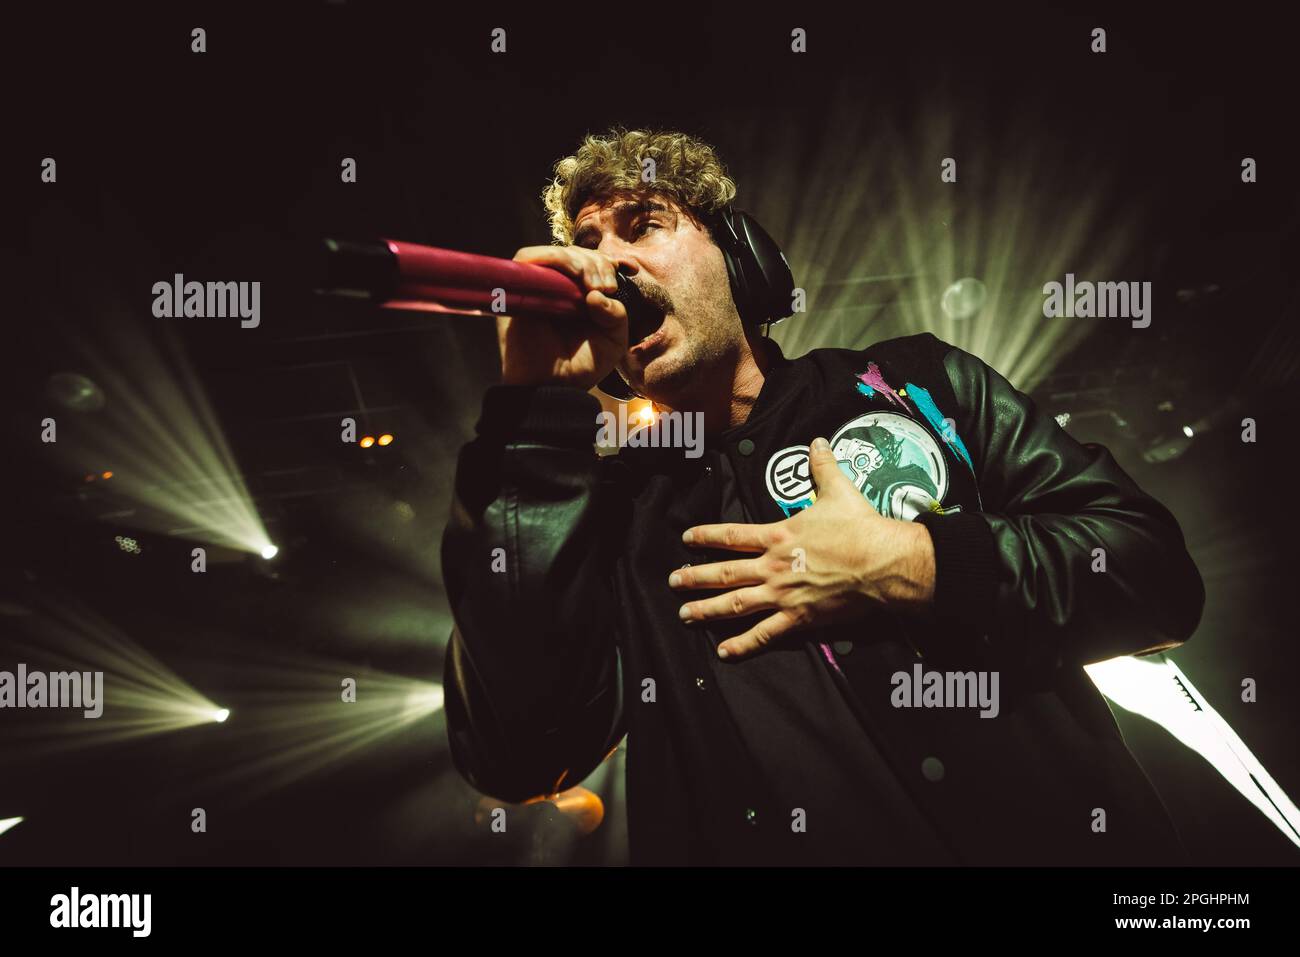 Copenhagen, Denmark. 21st, March 2023. The German electronicore band Electric Callboy performs a live concert at Amager Bio in Copenhagen. Here vocalist Nico Sallach is seen live on stage. (Photo credit: Gonzales Photo - Peter Troest). Stock Photo